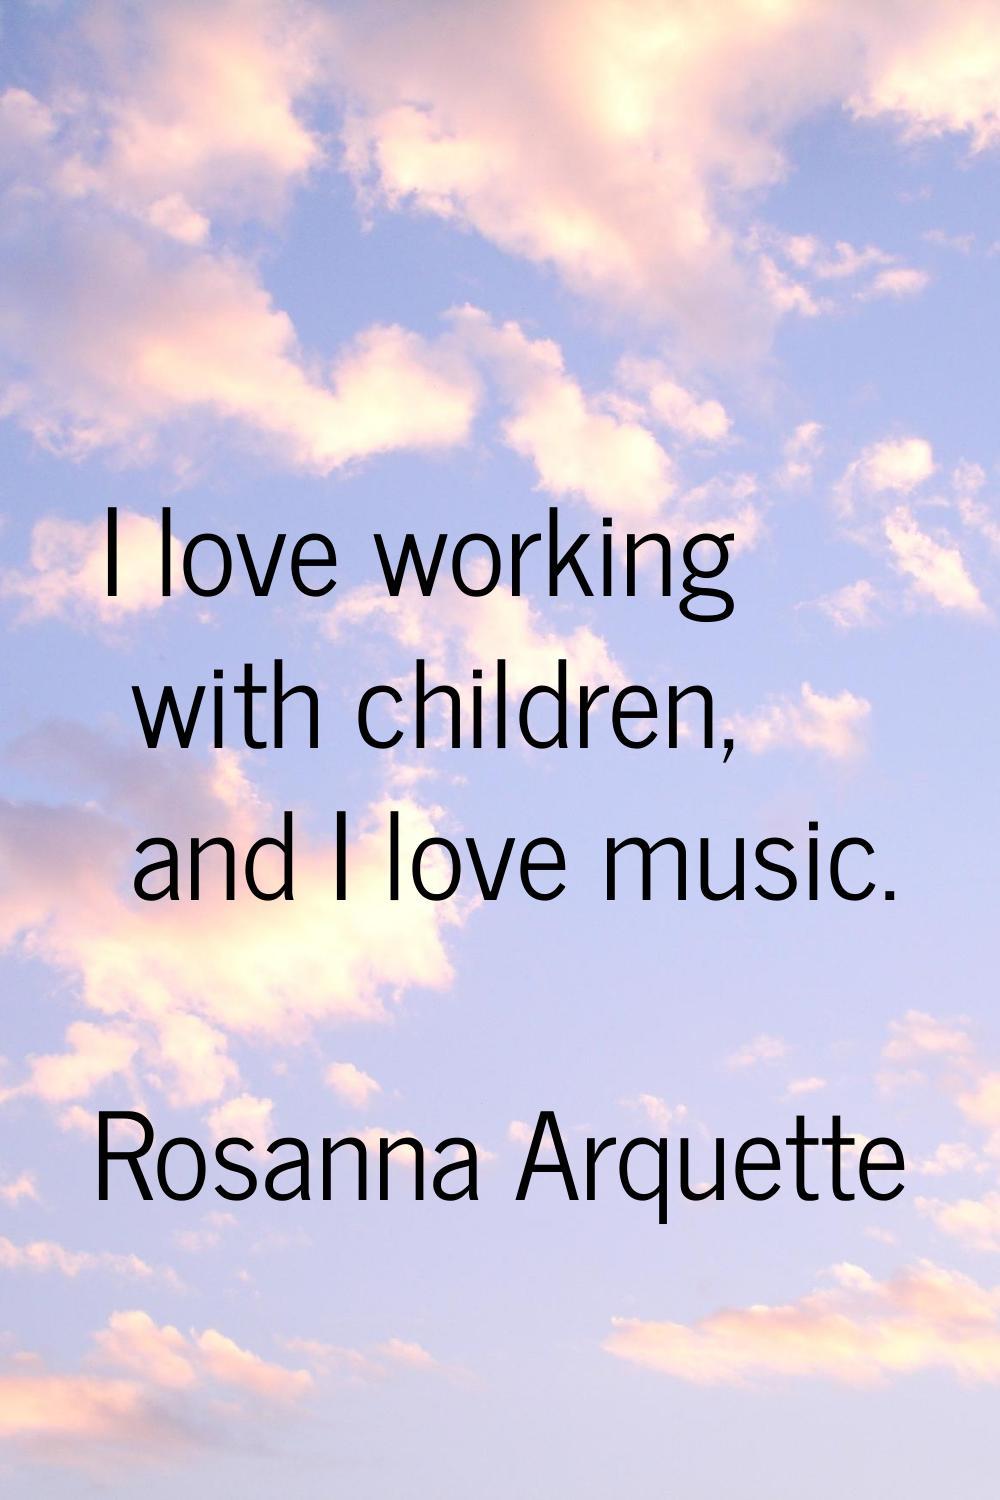 I love working with children, and I love music.